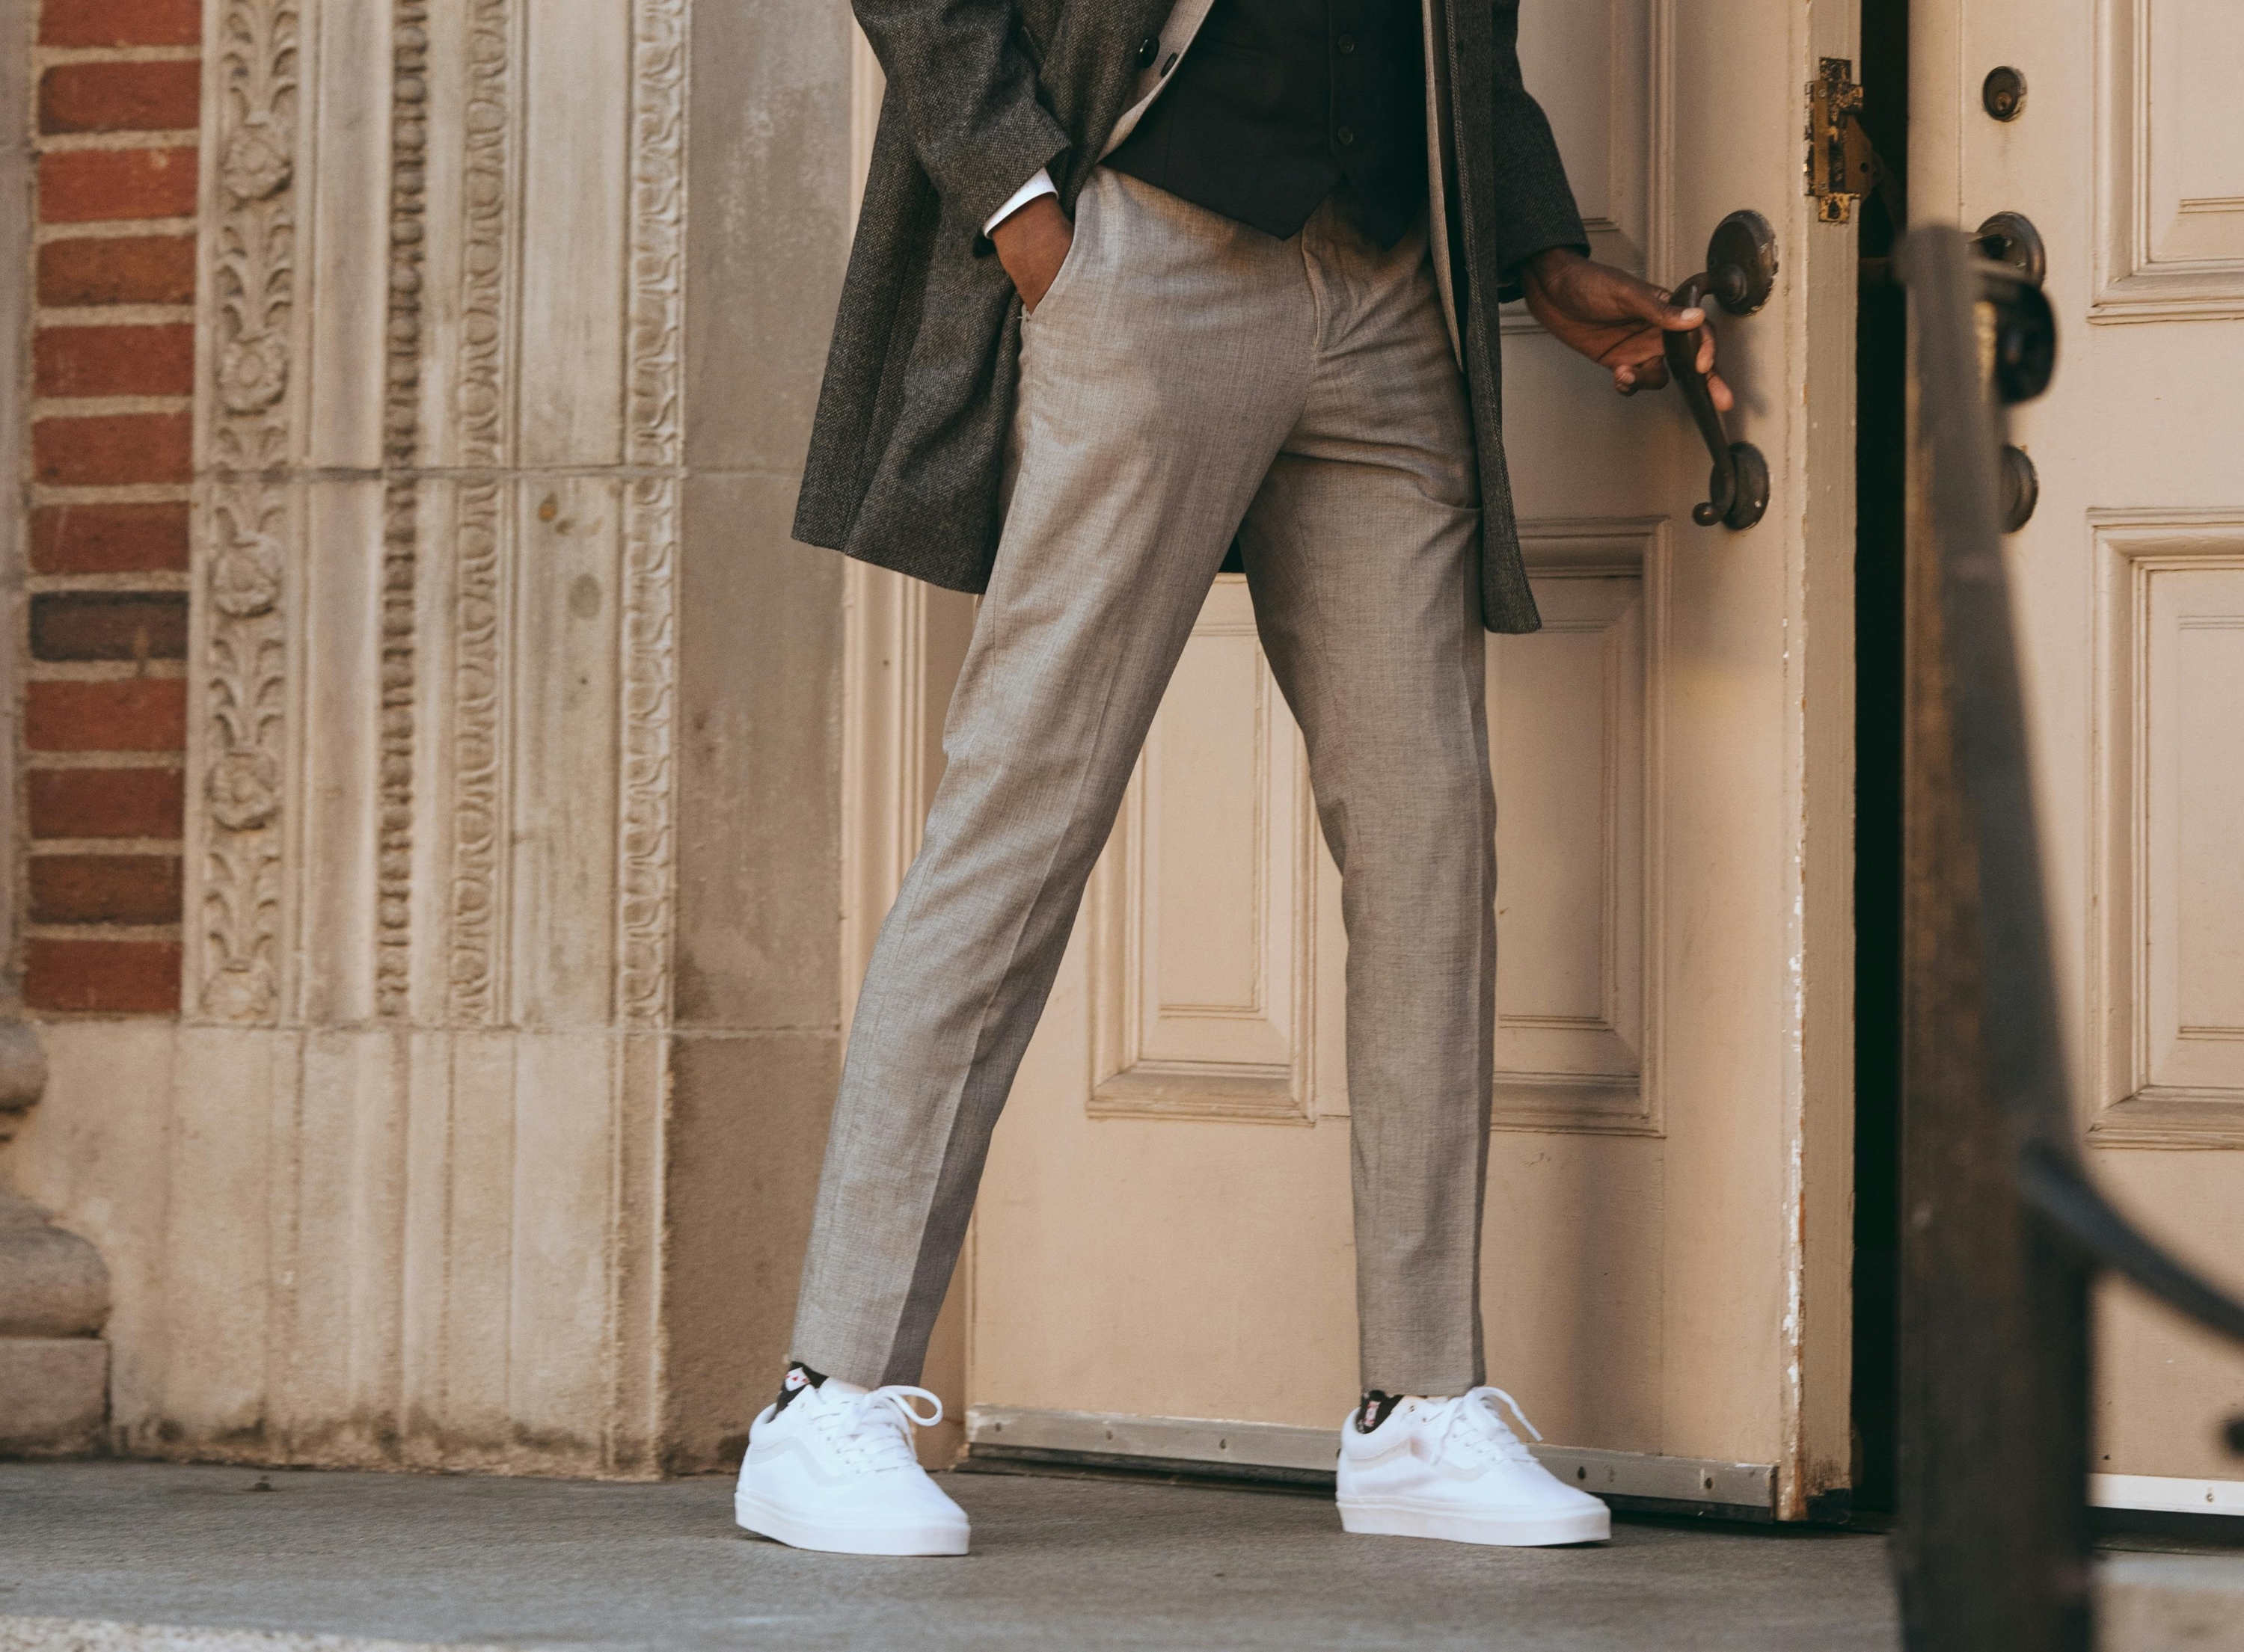 Sneakers & Slacks: A Casual Way To Wear Dressy Pants | Daily Craving |  Black dress pants outfits, Wear black dresses, Dressy pants